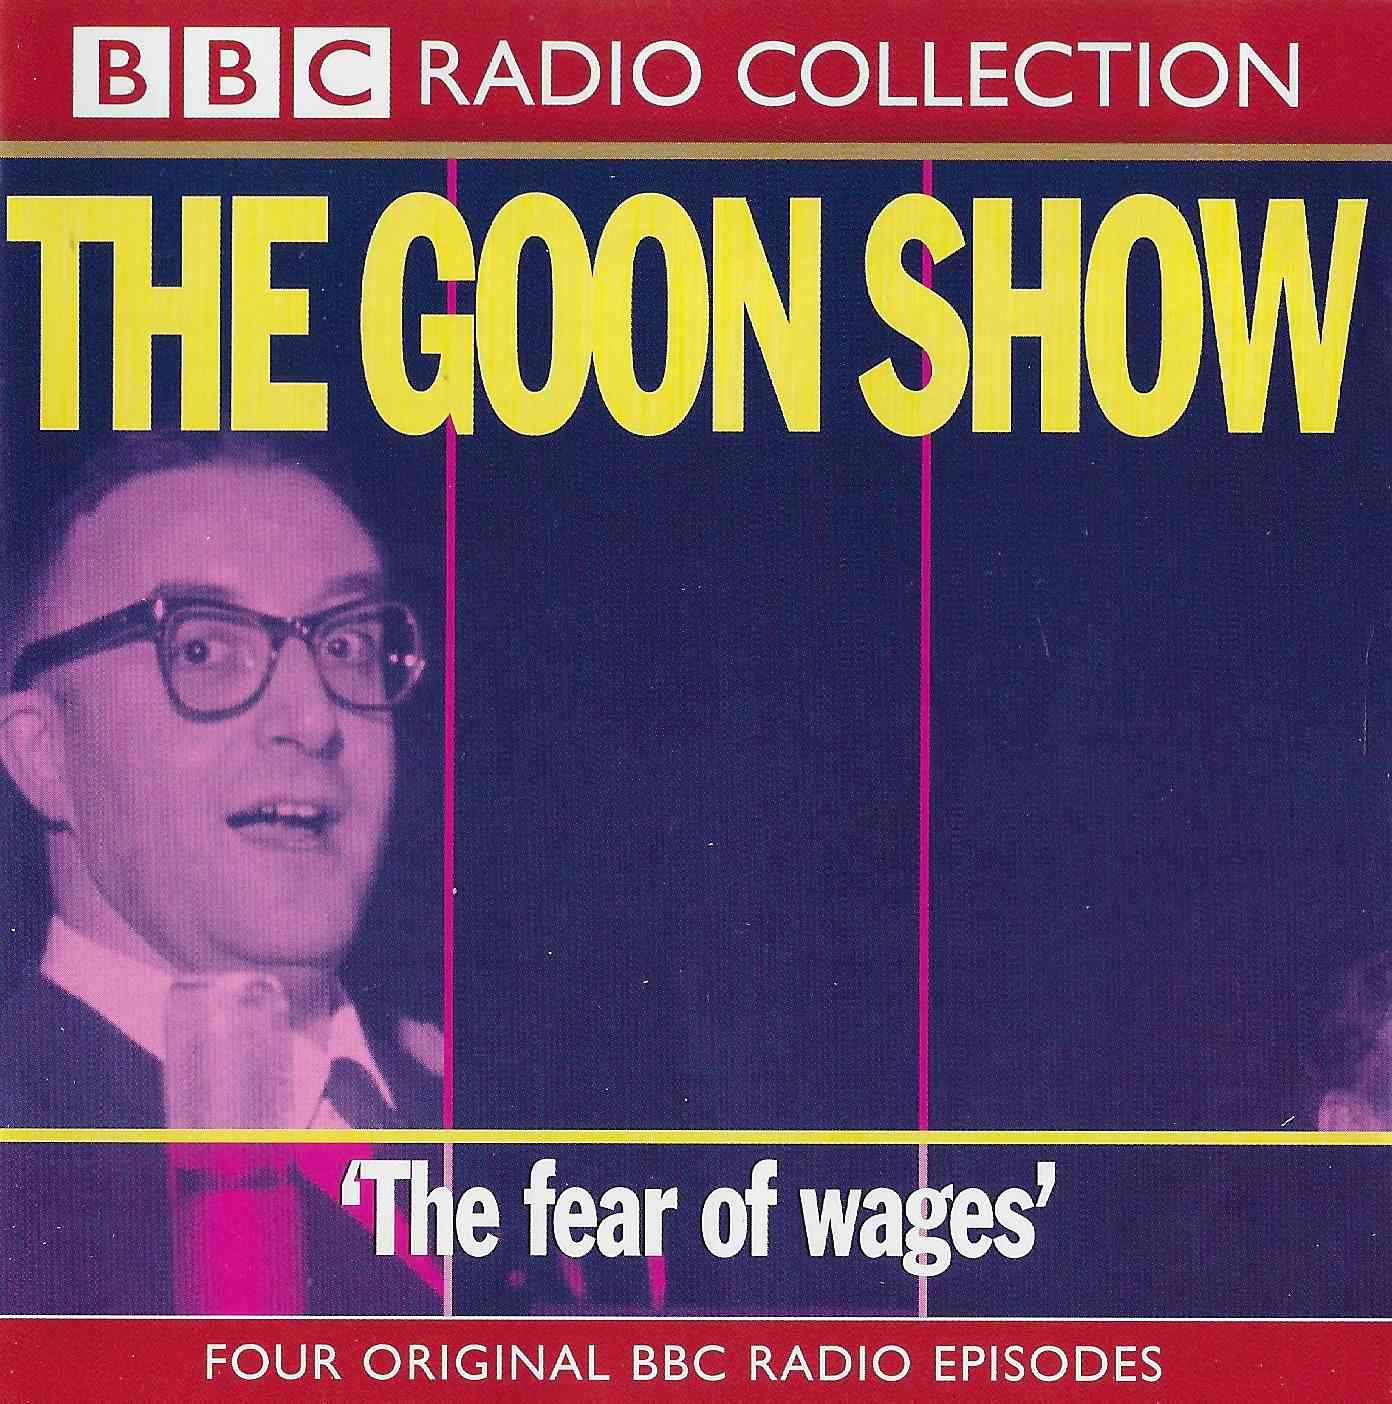 Picture of ISBN 0-563-53629-2 The Goon Show 20 - The fear of wages by artist Spike Milligan / Larry Stephens